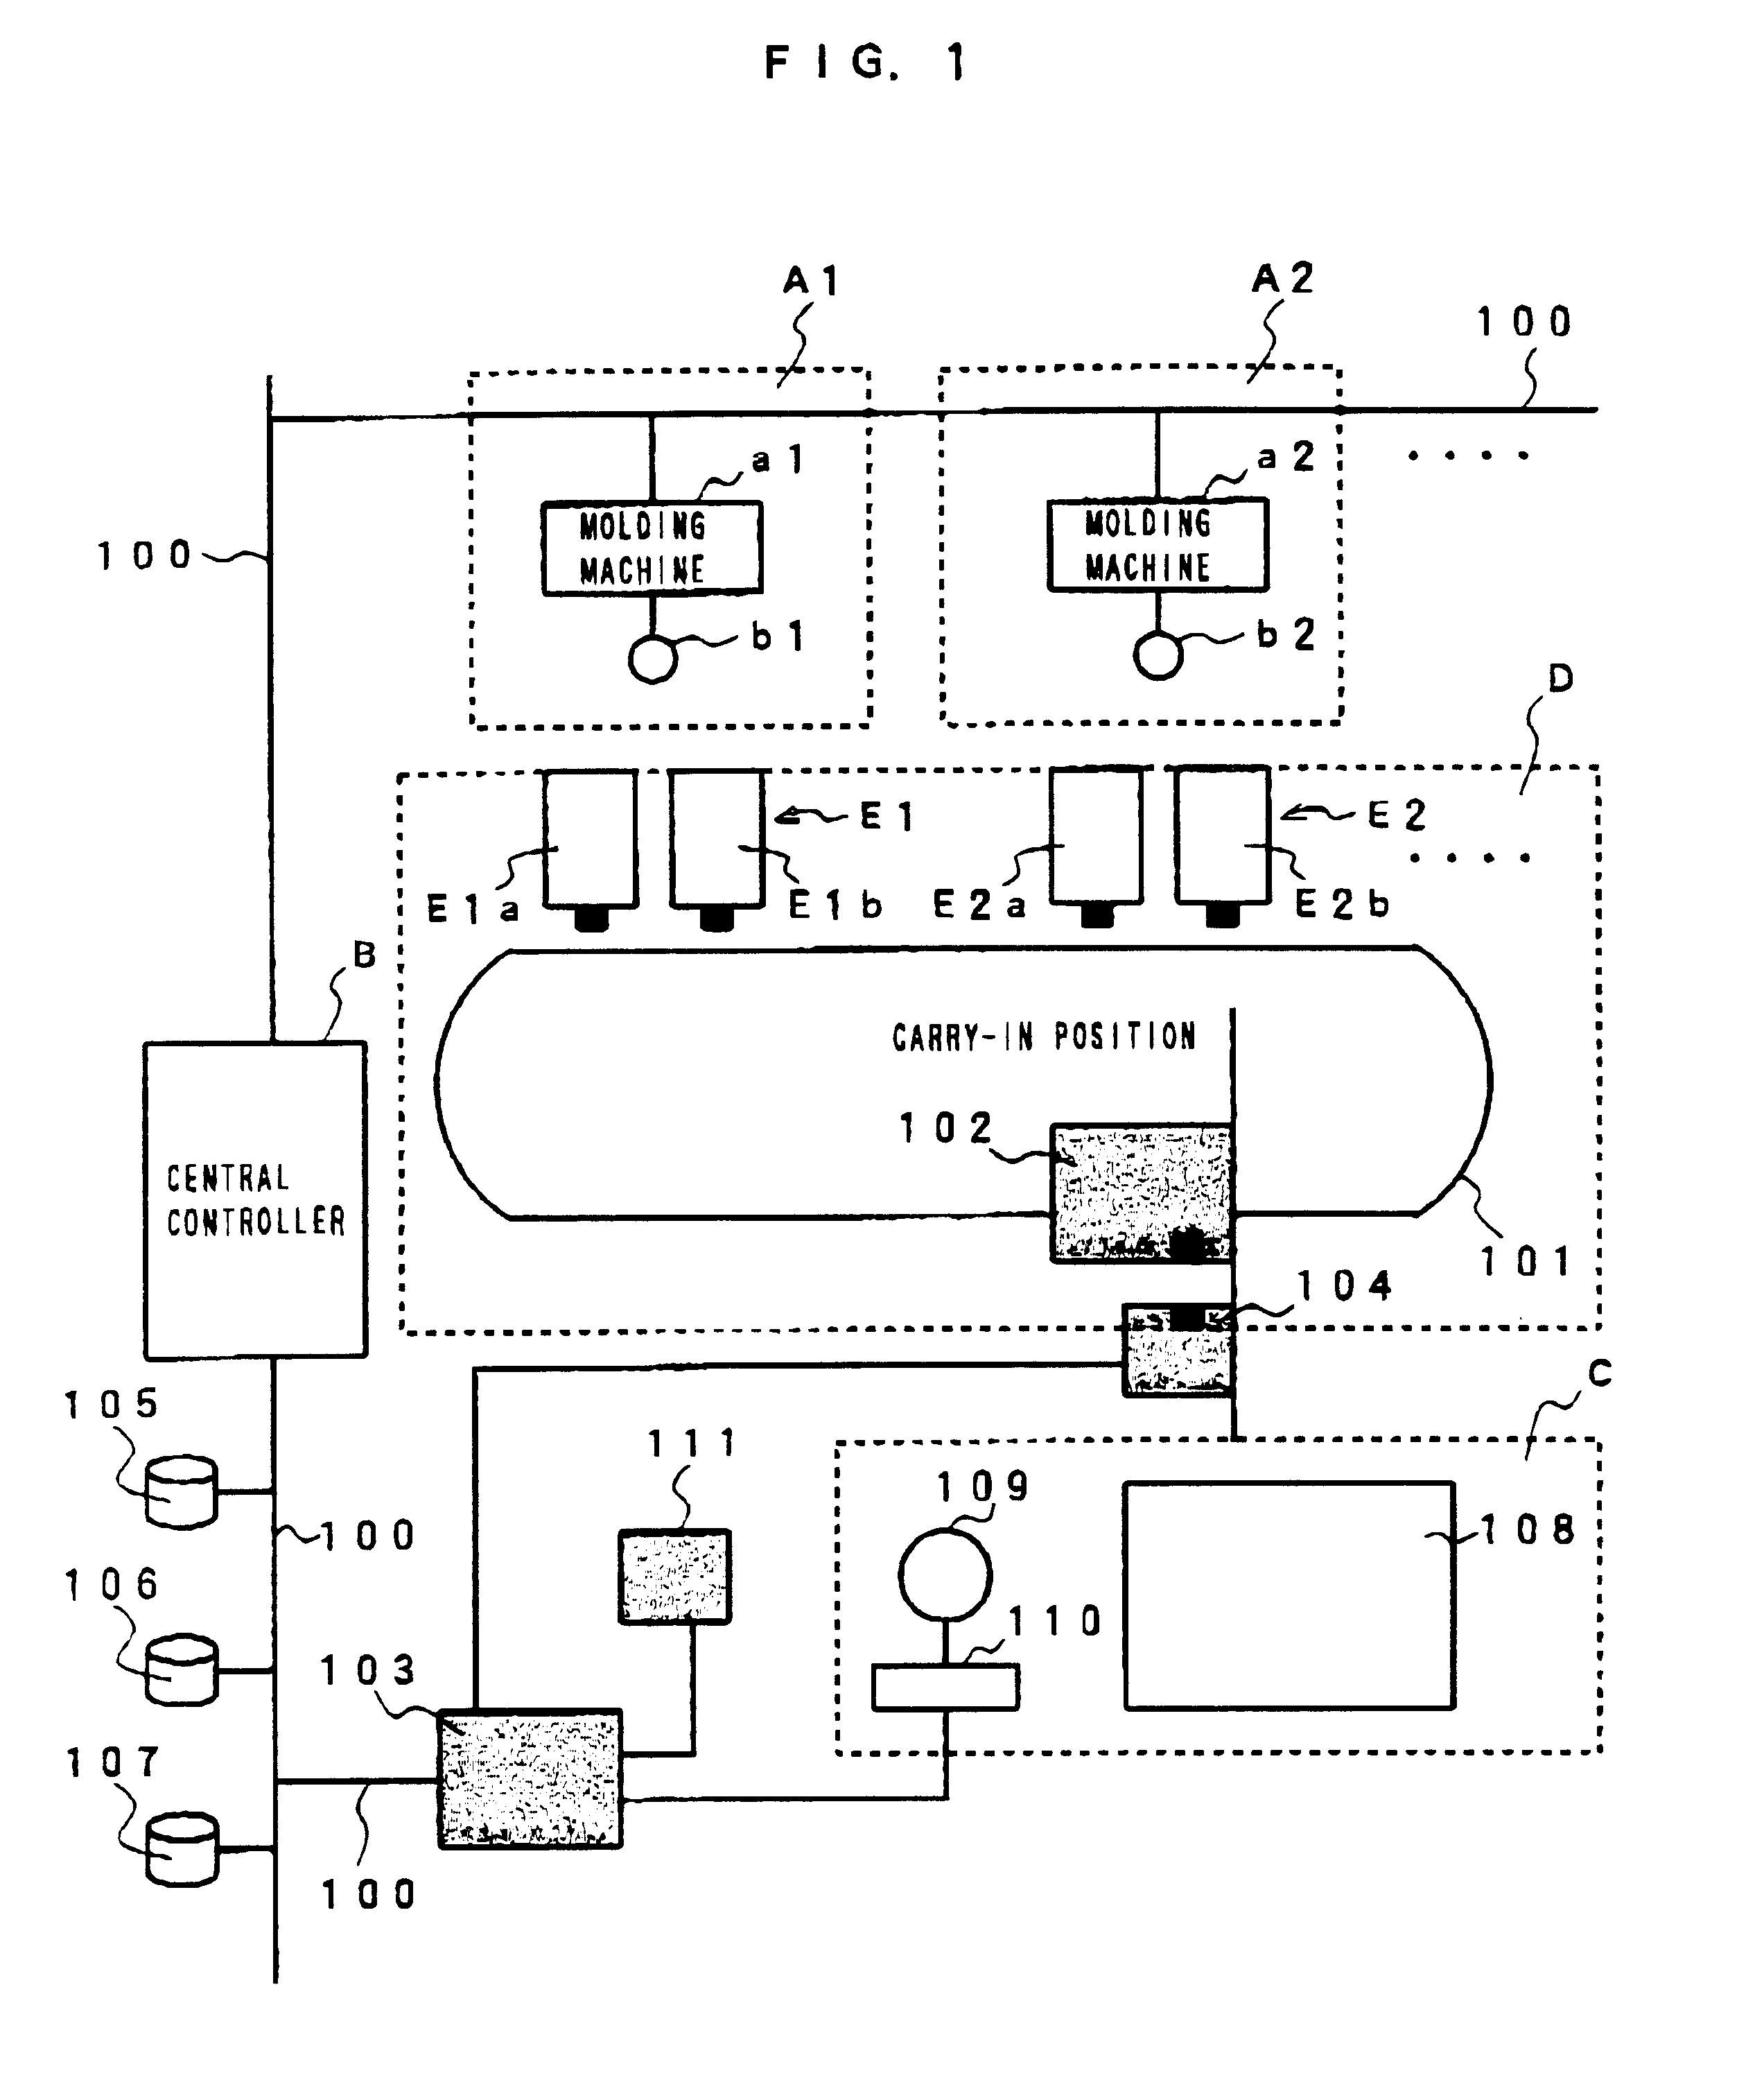 Information transmitting system for use in factory